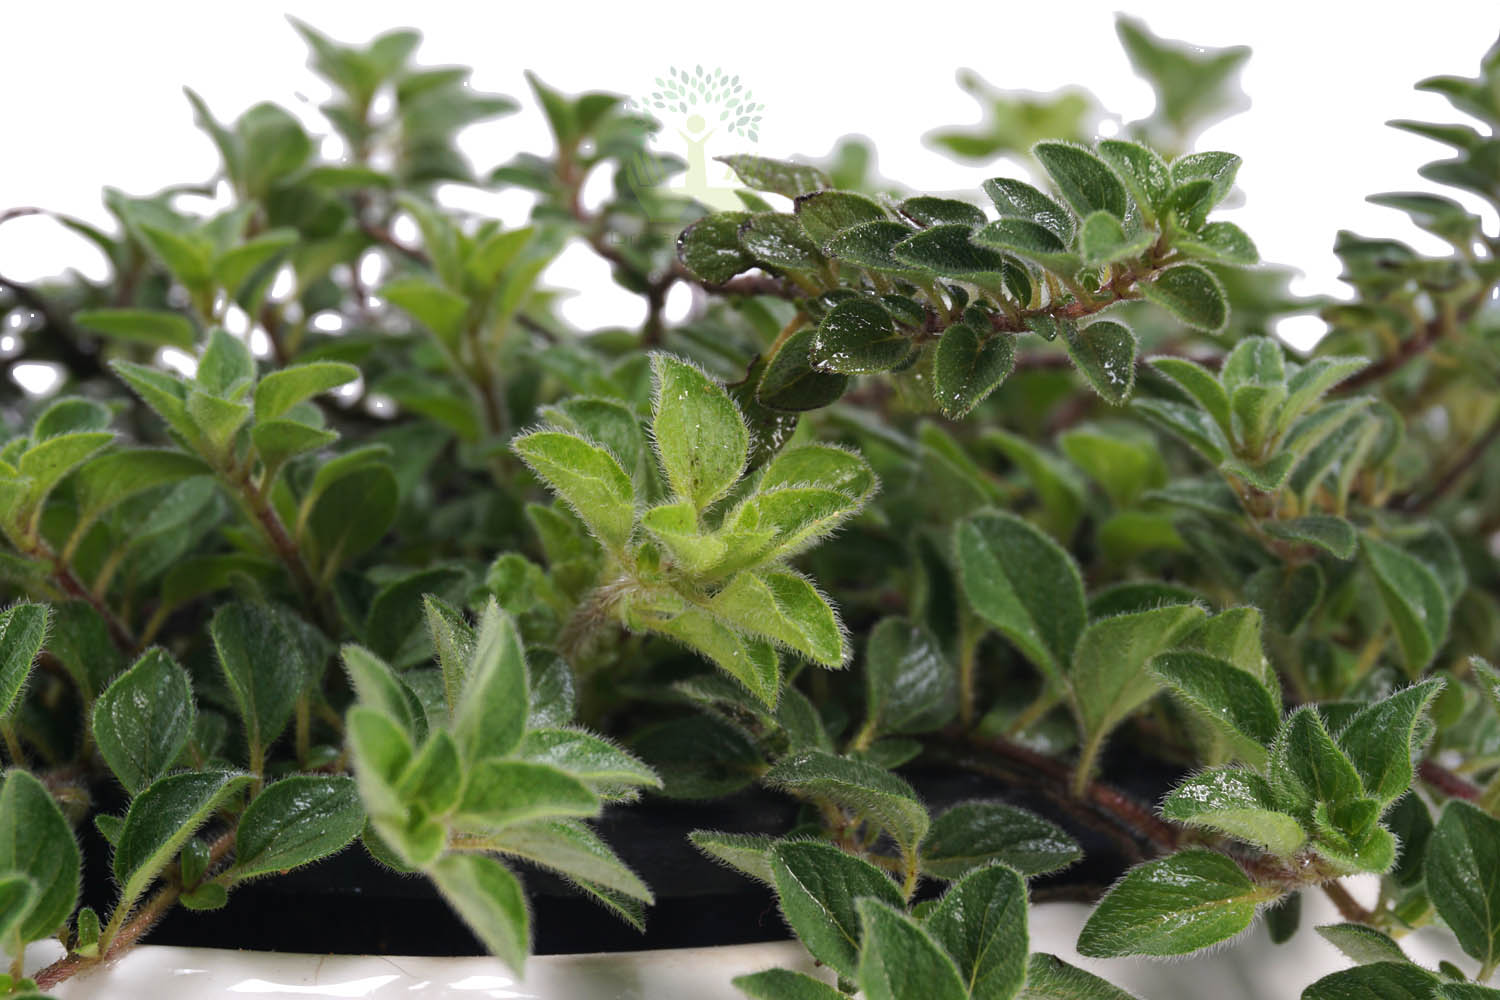 Buy Sage Plants , White Pots and seeds in Delhi NCR by the best online nursery shop Greendecor.